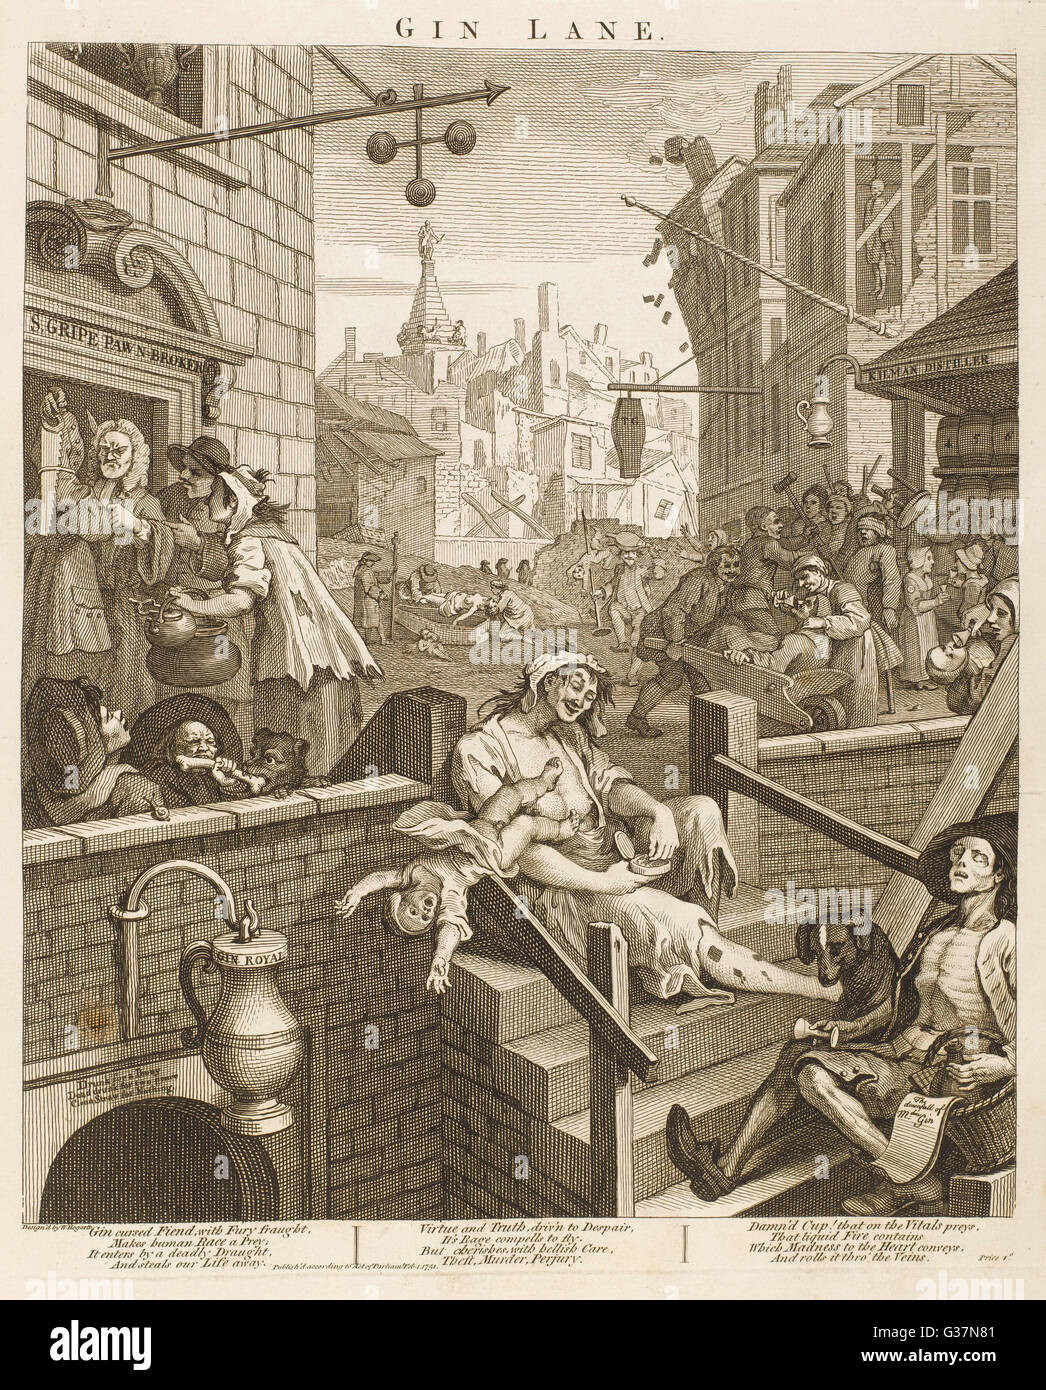 Political  print of Gin Lane  supporting a ministerial  measure against the unlimited  sale of gin.  The pawnbrokers, gin cellar and distillery are  now flourishing.     Date: February 1750/1 Stock Photo